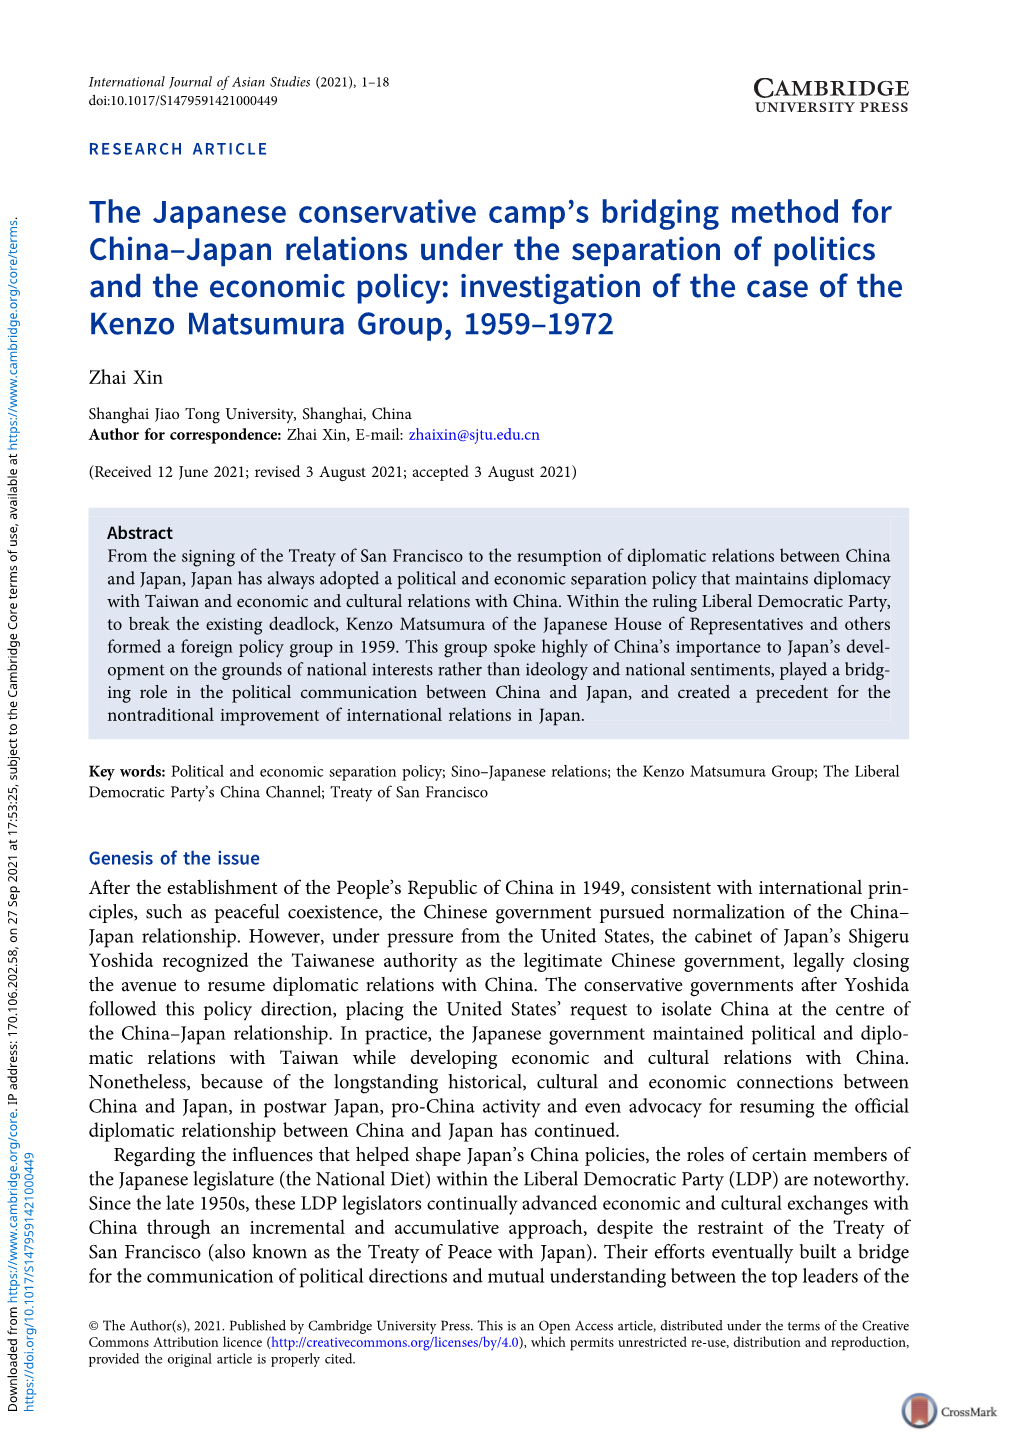 The Japanese Conservative Camp's Bridging Method for China–Japan